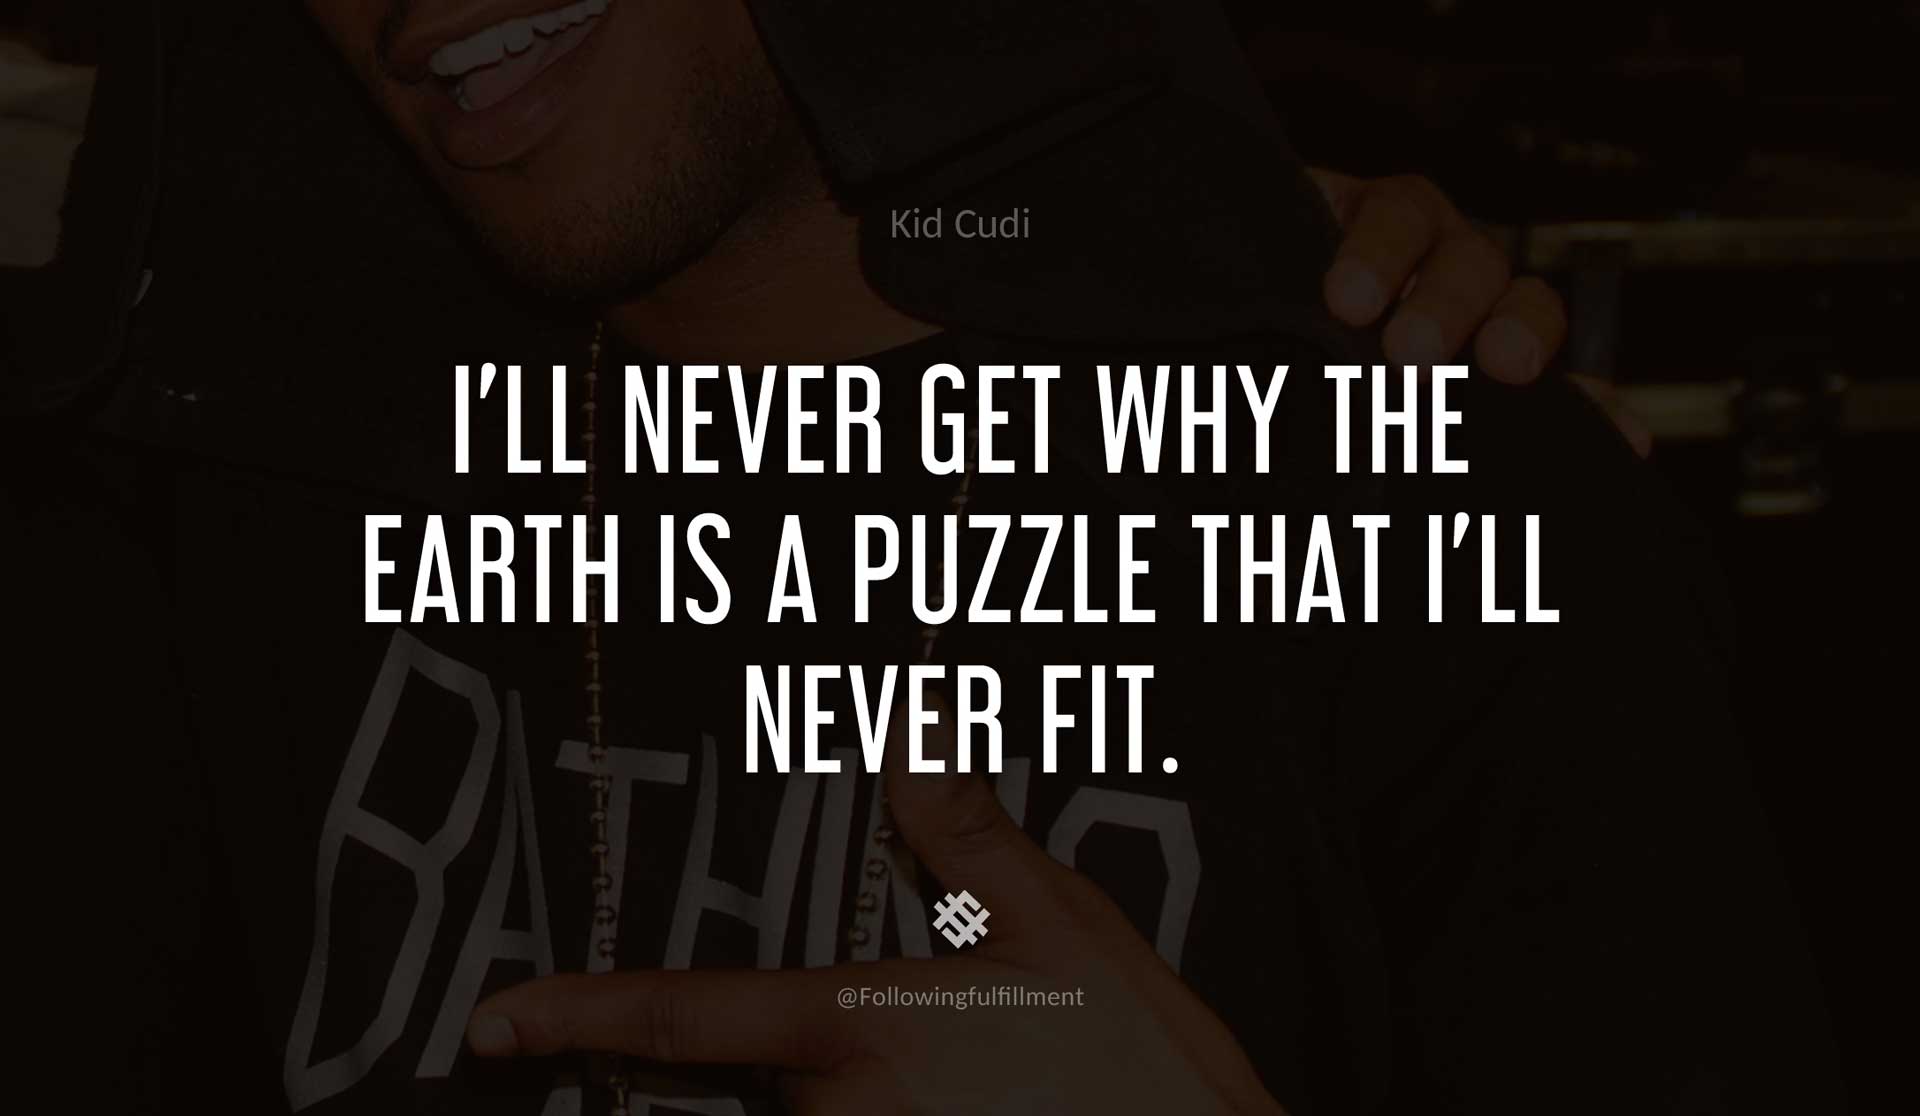 I'll-never-get-why-the-earth-is-a-puzzle-that-i'll-never-fit.-KID-CUDI-Quote.jpg